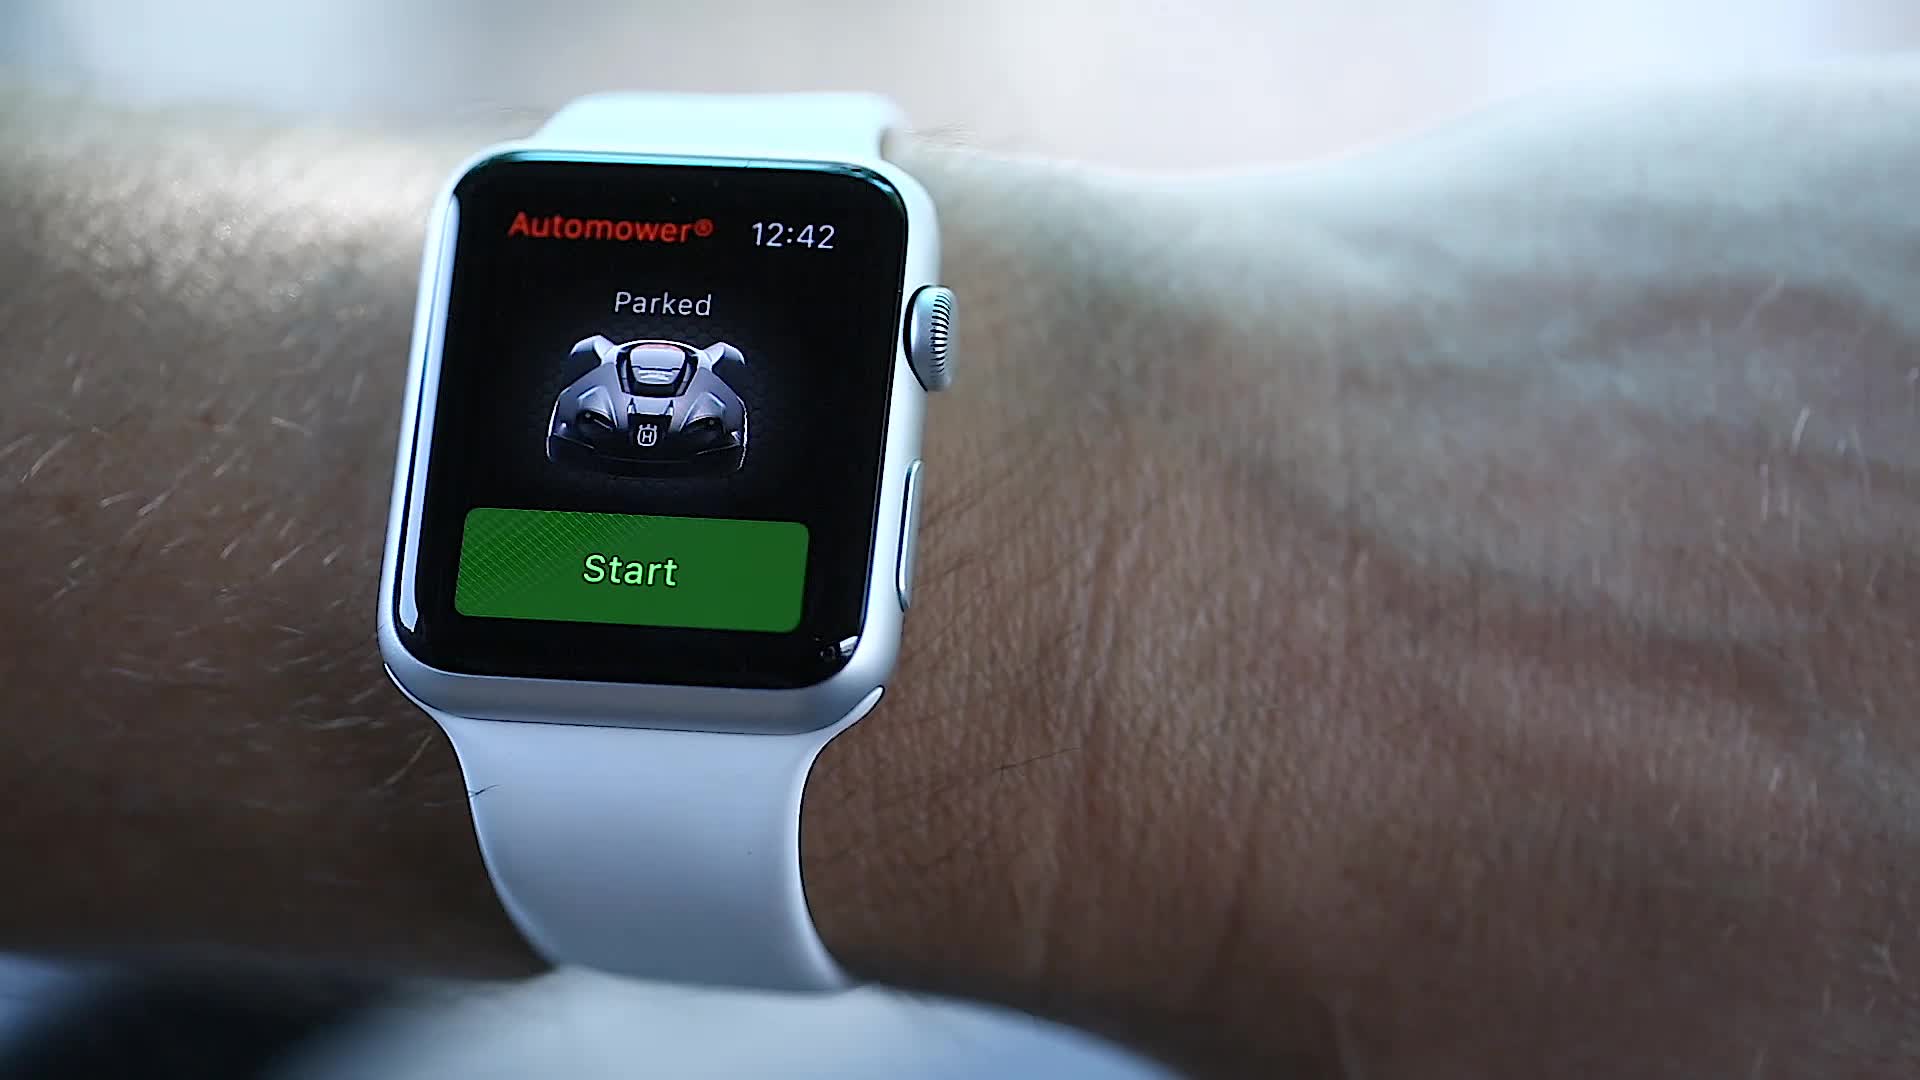 How to use Automower Connect Apple Watch 35s 16:9 MASTER